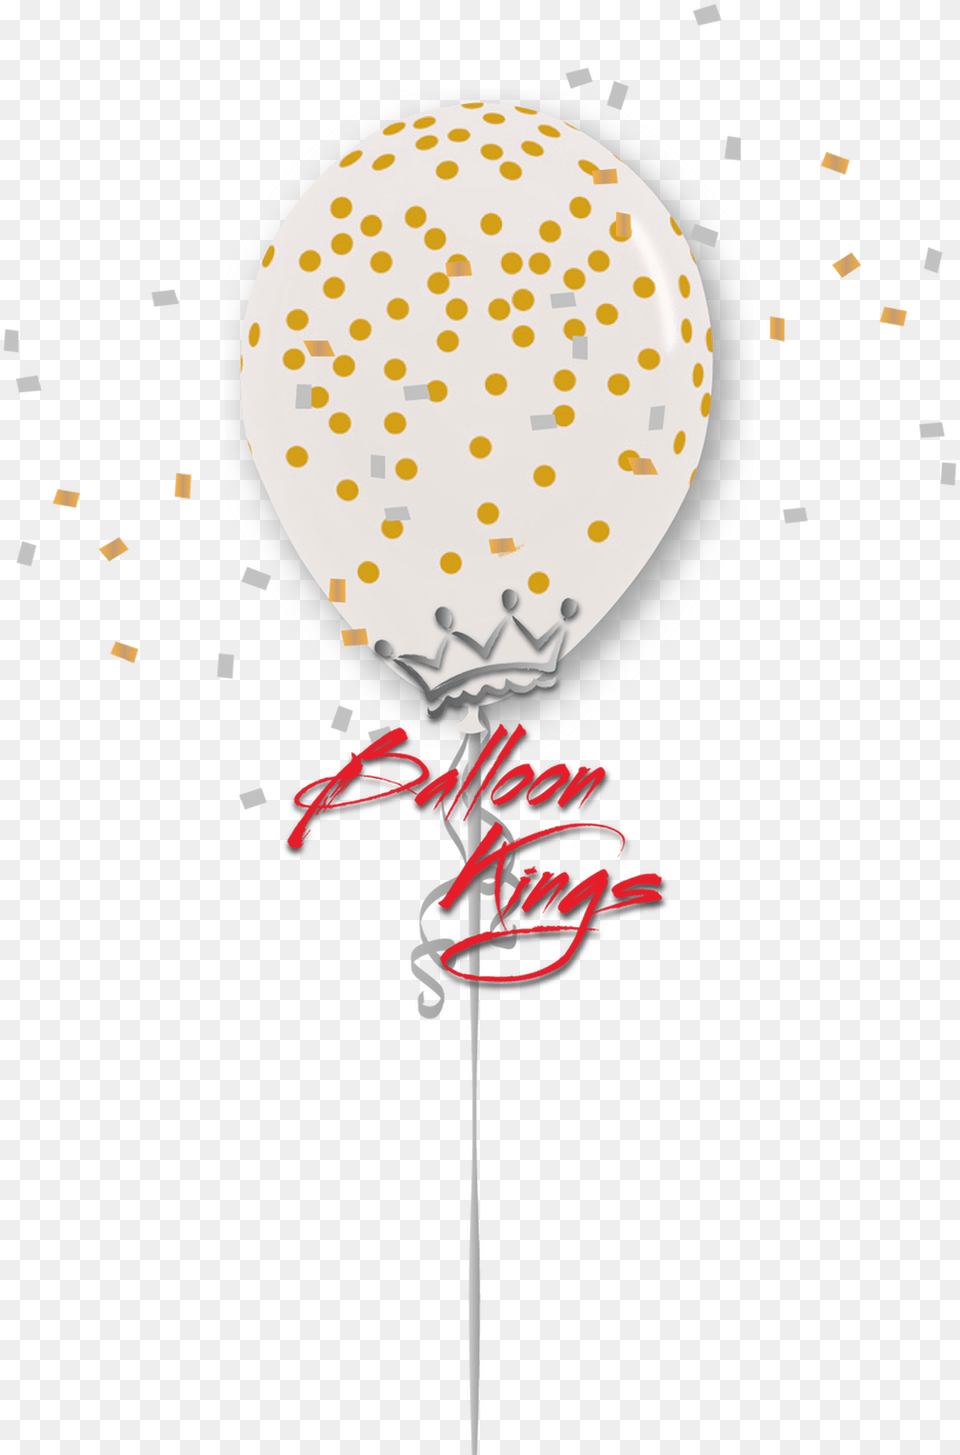 Clear Gold Dots Full Hd Edit Photo Background, Balloon, Paper, Plate, Confetti Free Png Download